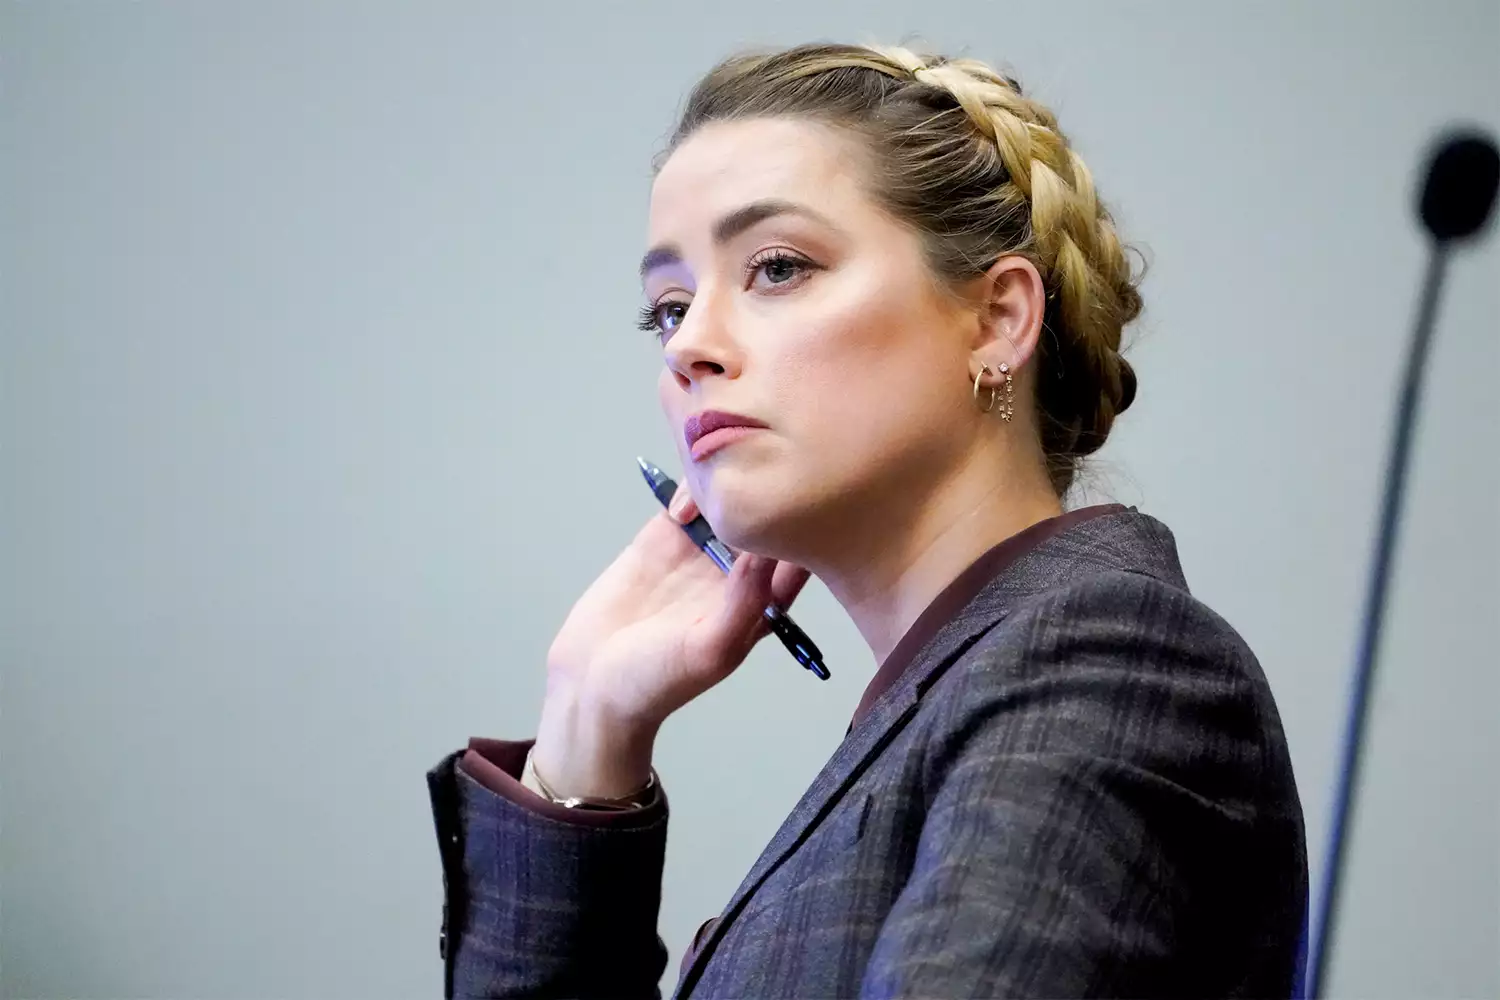 Johnny Depp trial – live: Amber Heard op-ed was ‘catastrophic’ for Pirates actor’s career, agent says